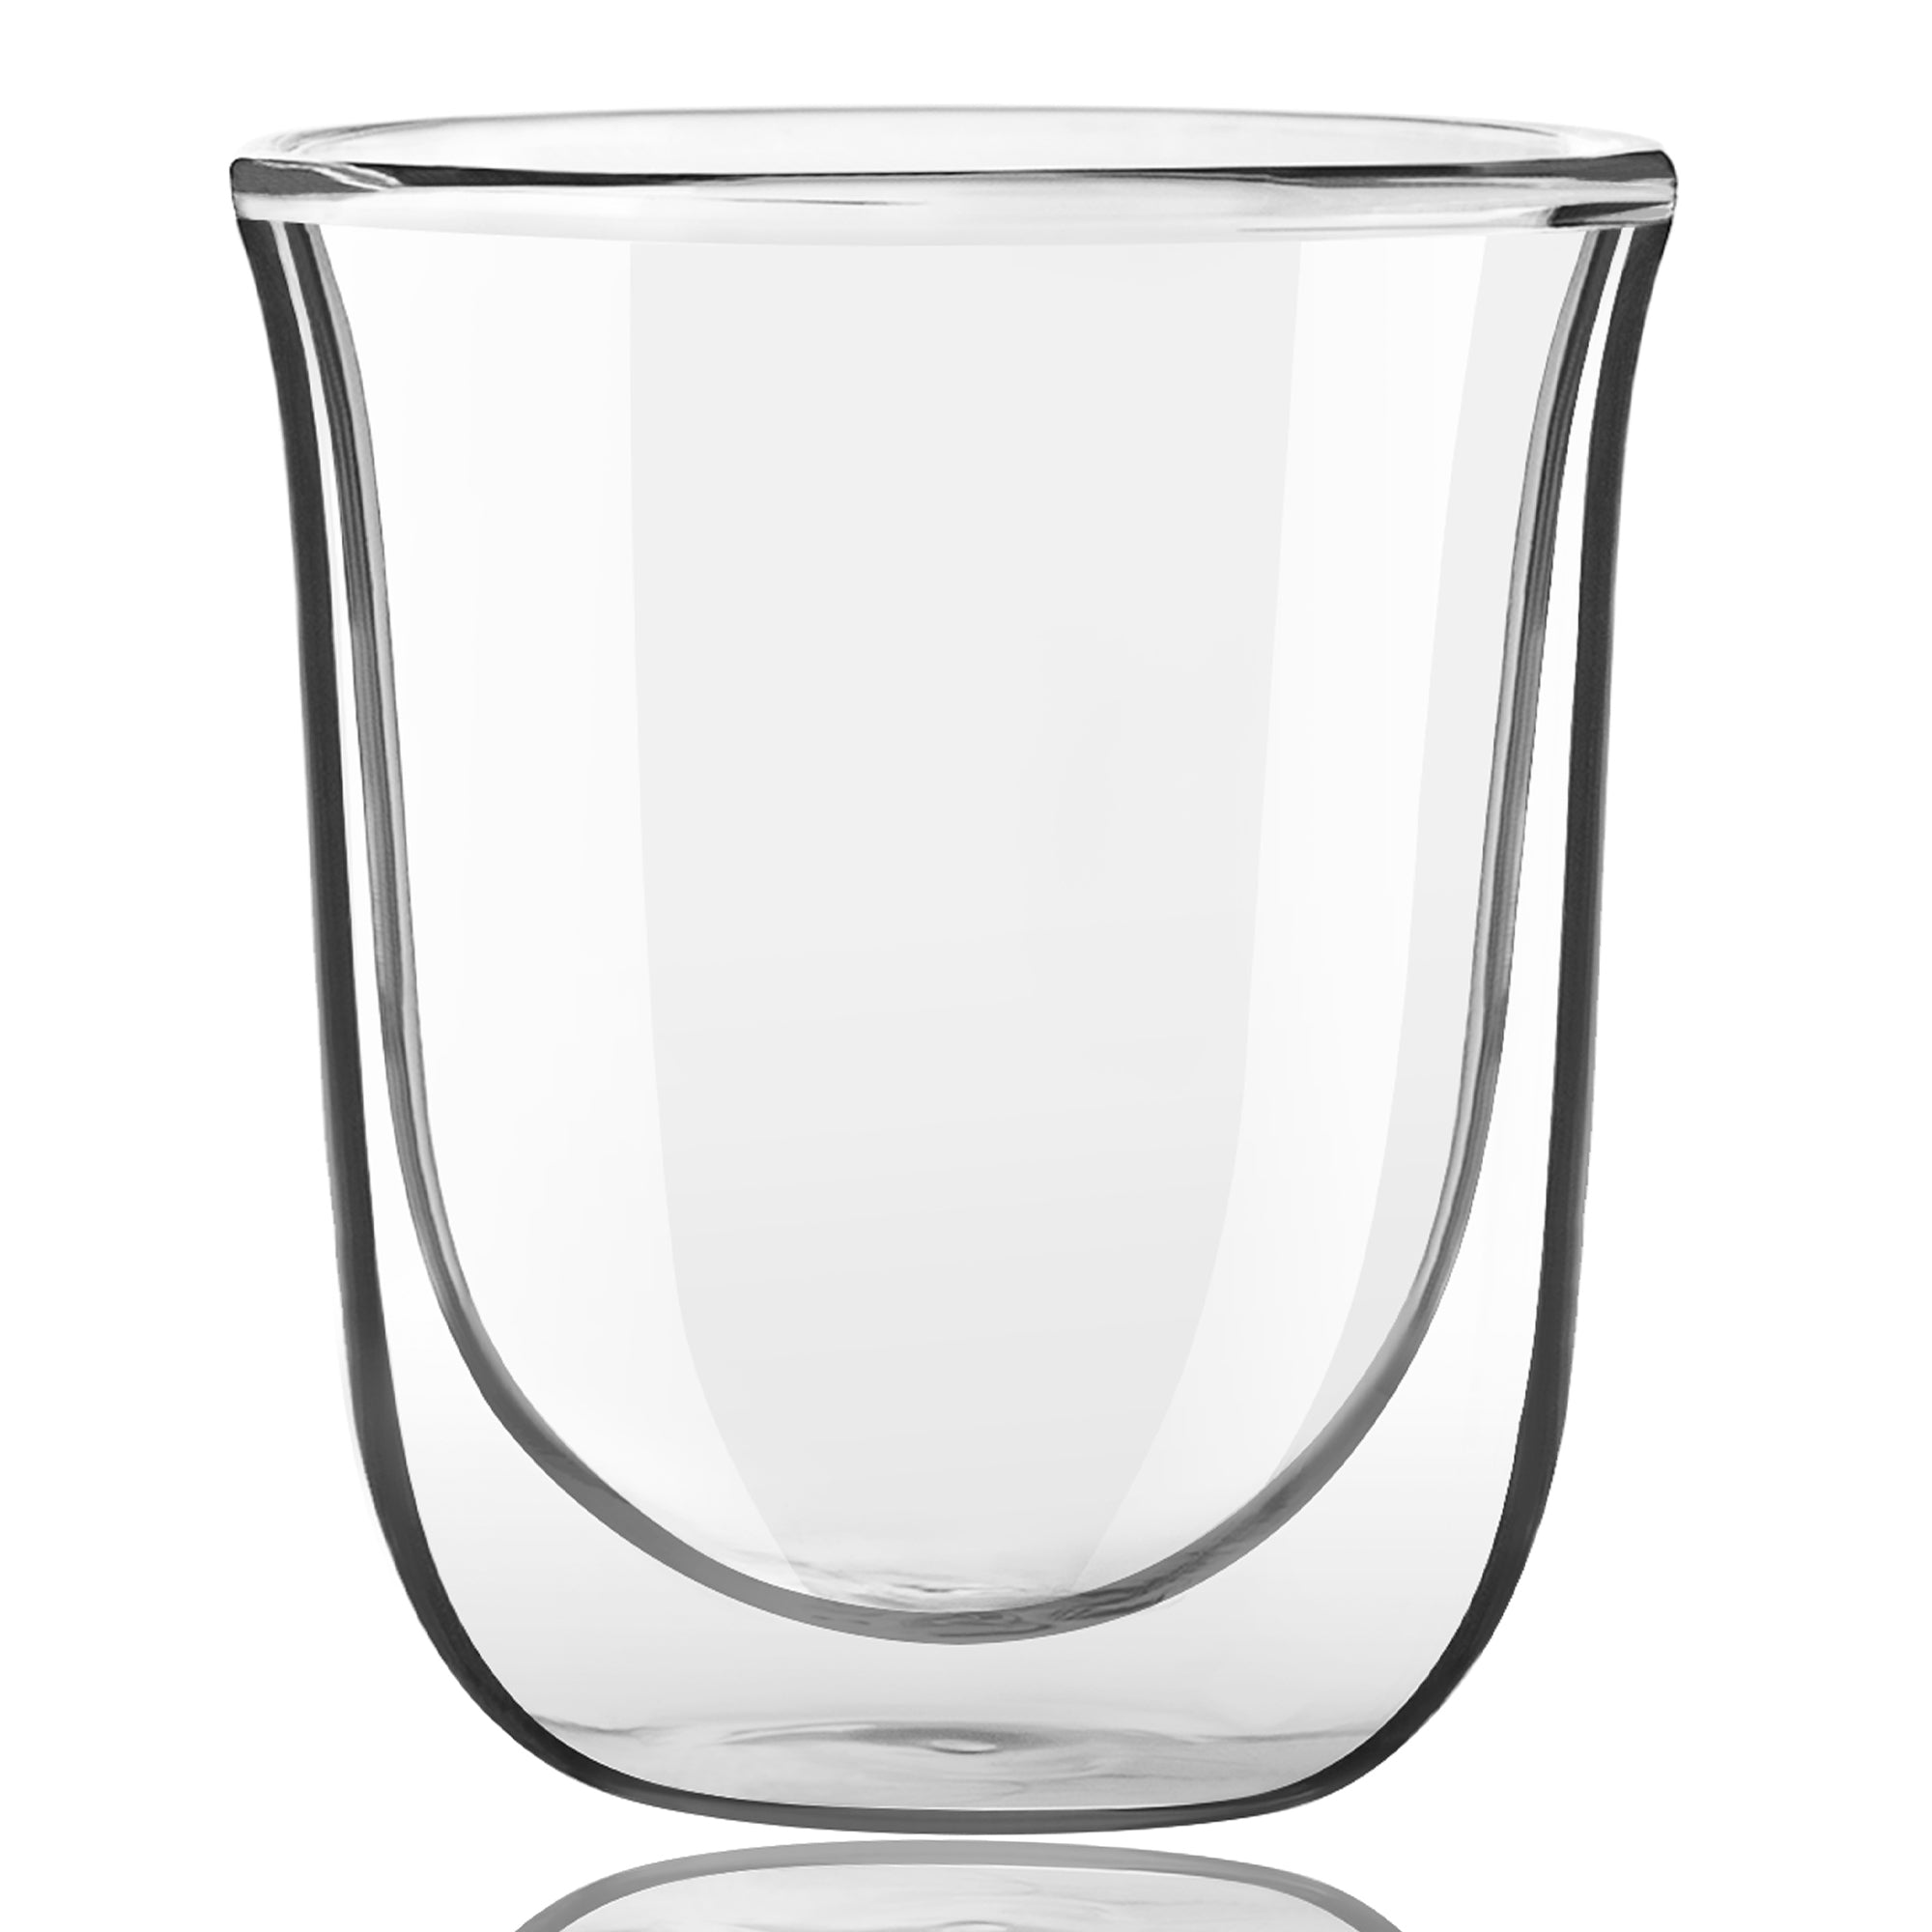 Javaah Double Wall Espresso Glasses